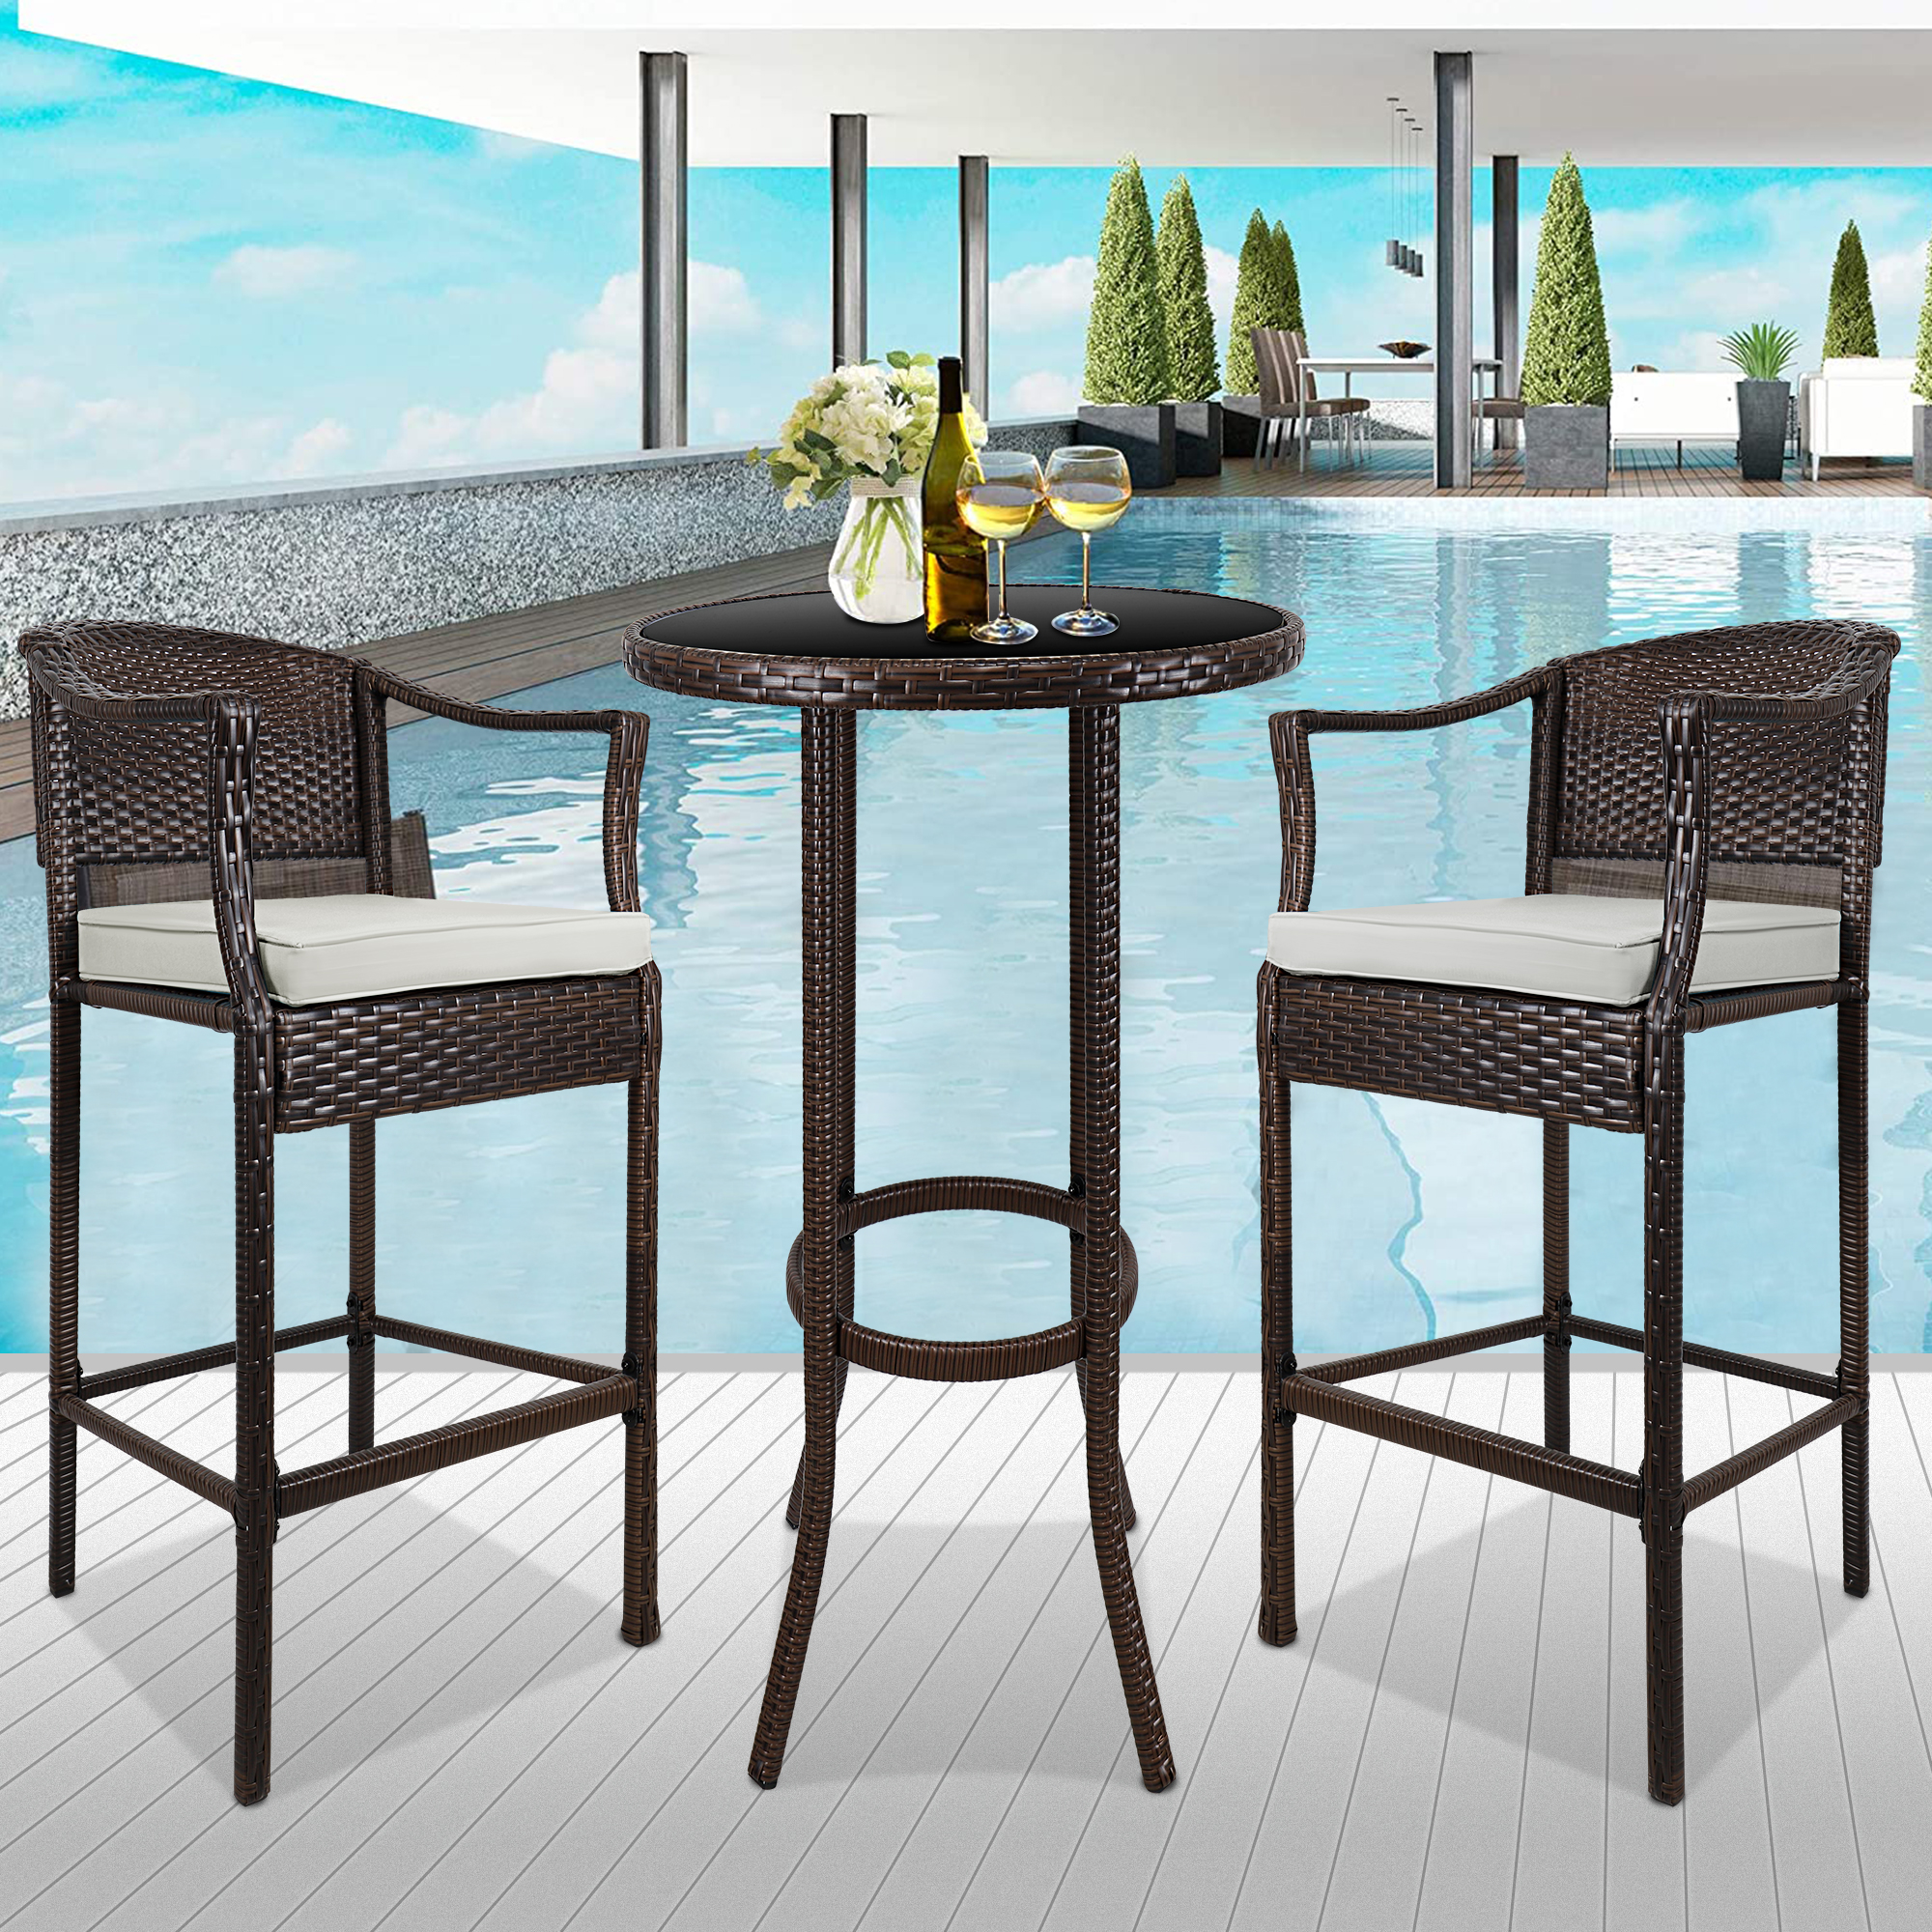 Patio Bistro Set, 3 Piece Outdoor Bar Table and Stools Set, 2 Patio Cushioned Bar Chairs with 1 High Glass Top Table, All Weather PE Rattan Furniture Set for Garden Yard Balcony Poolside Cafe, B16 - image 1 of 9